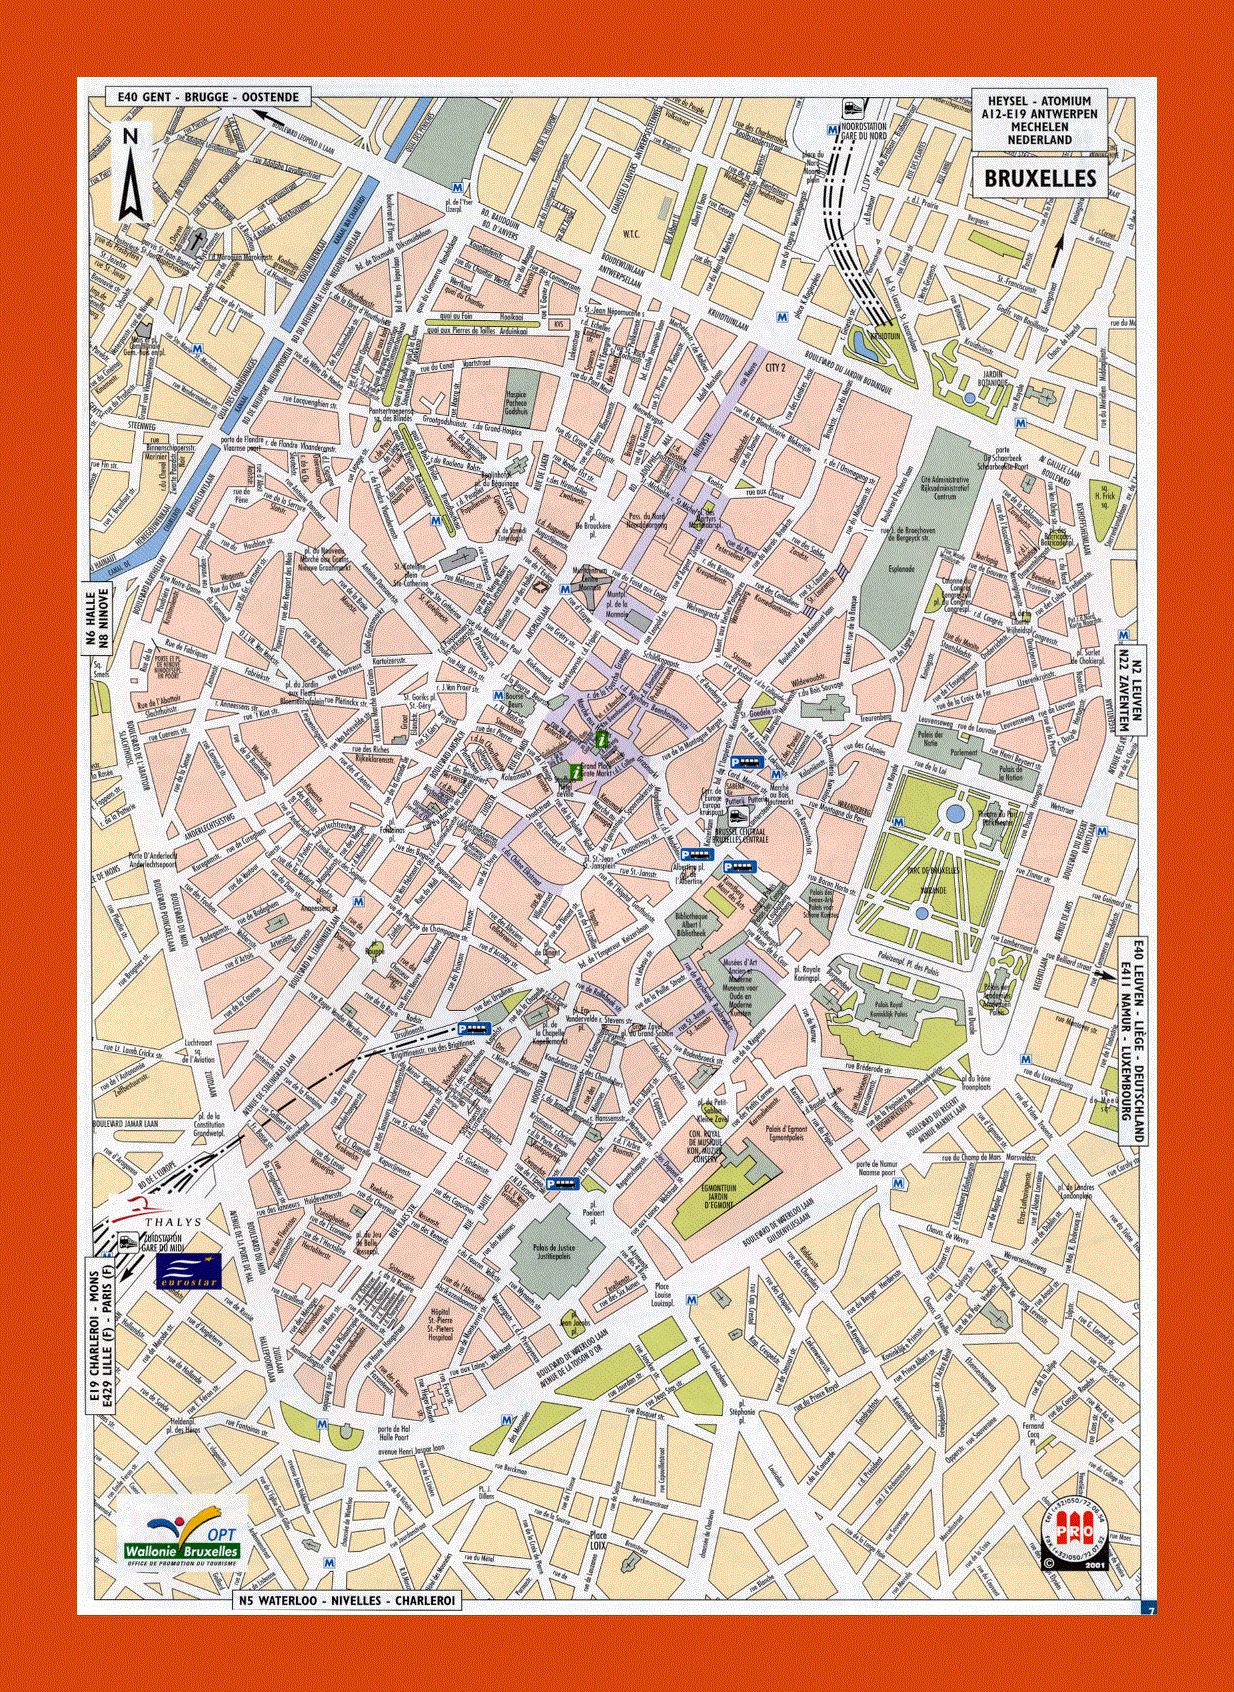 Road map of Brussels city